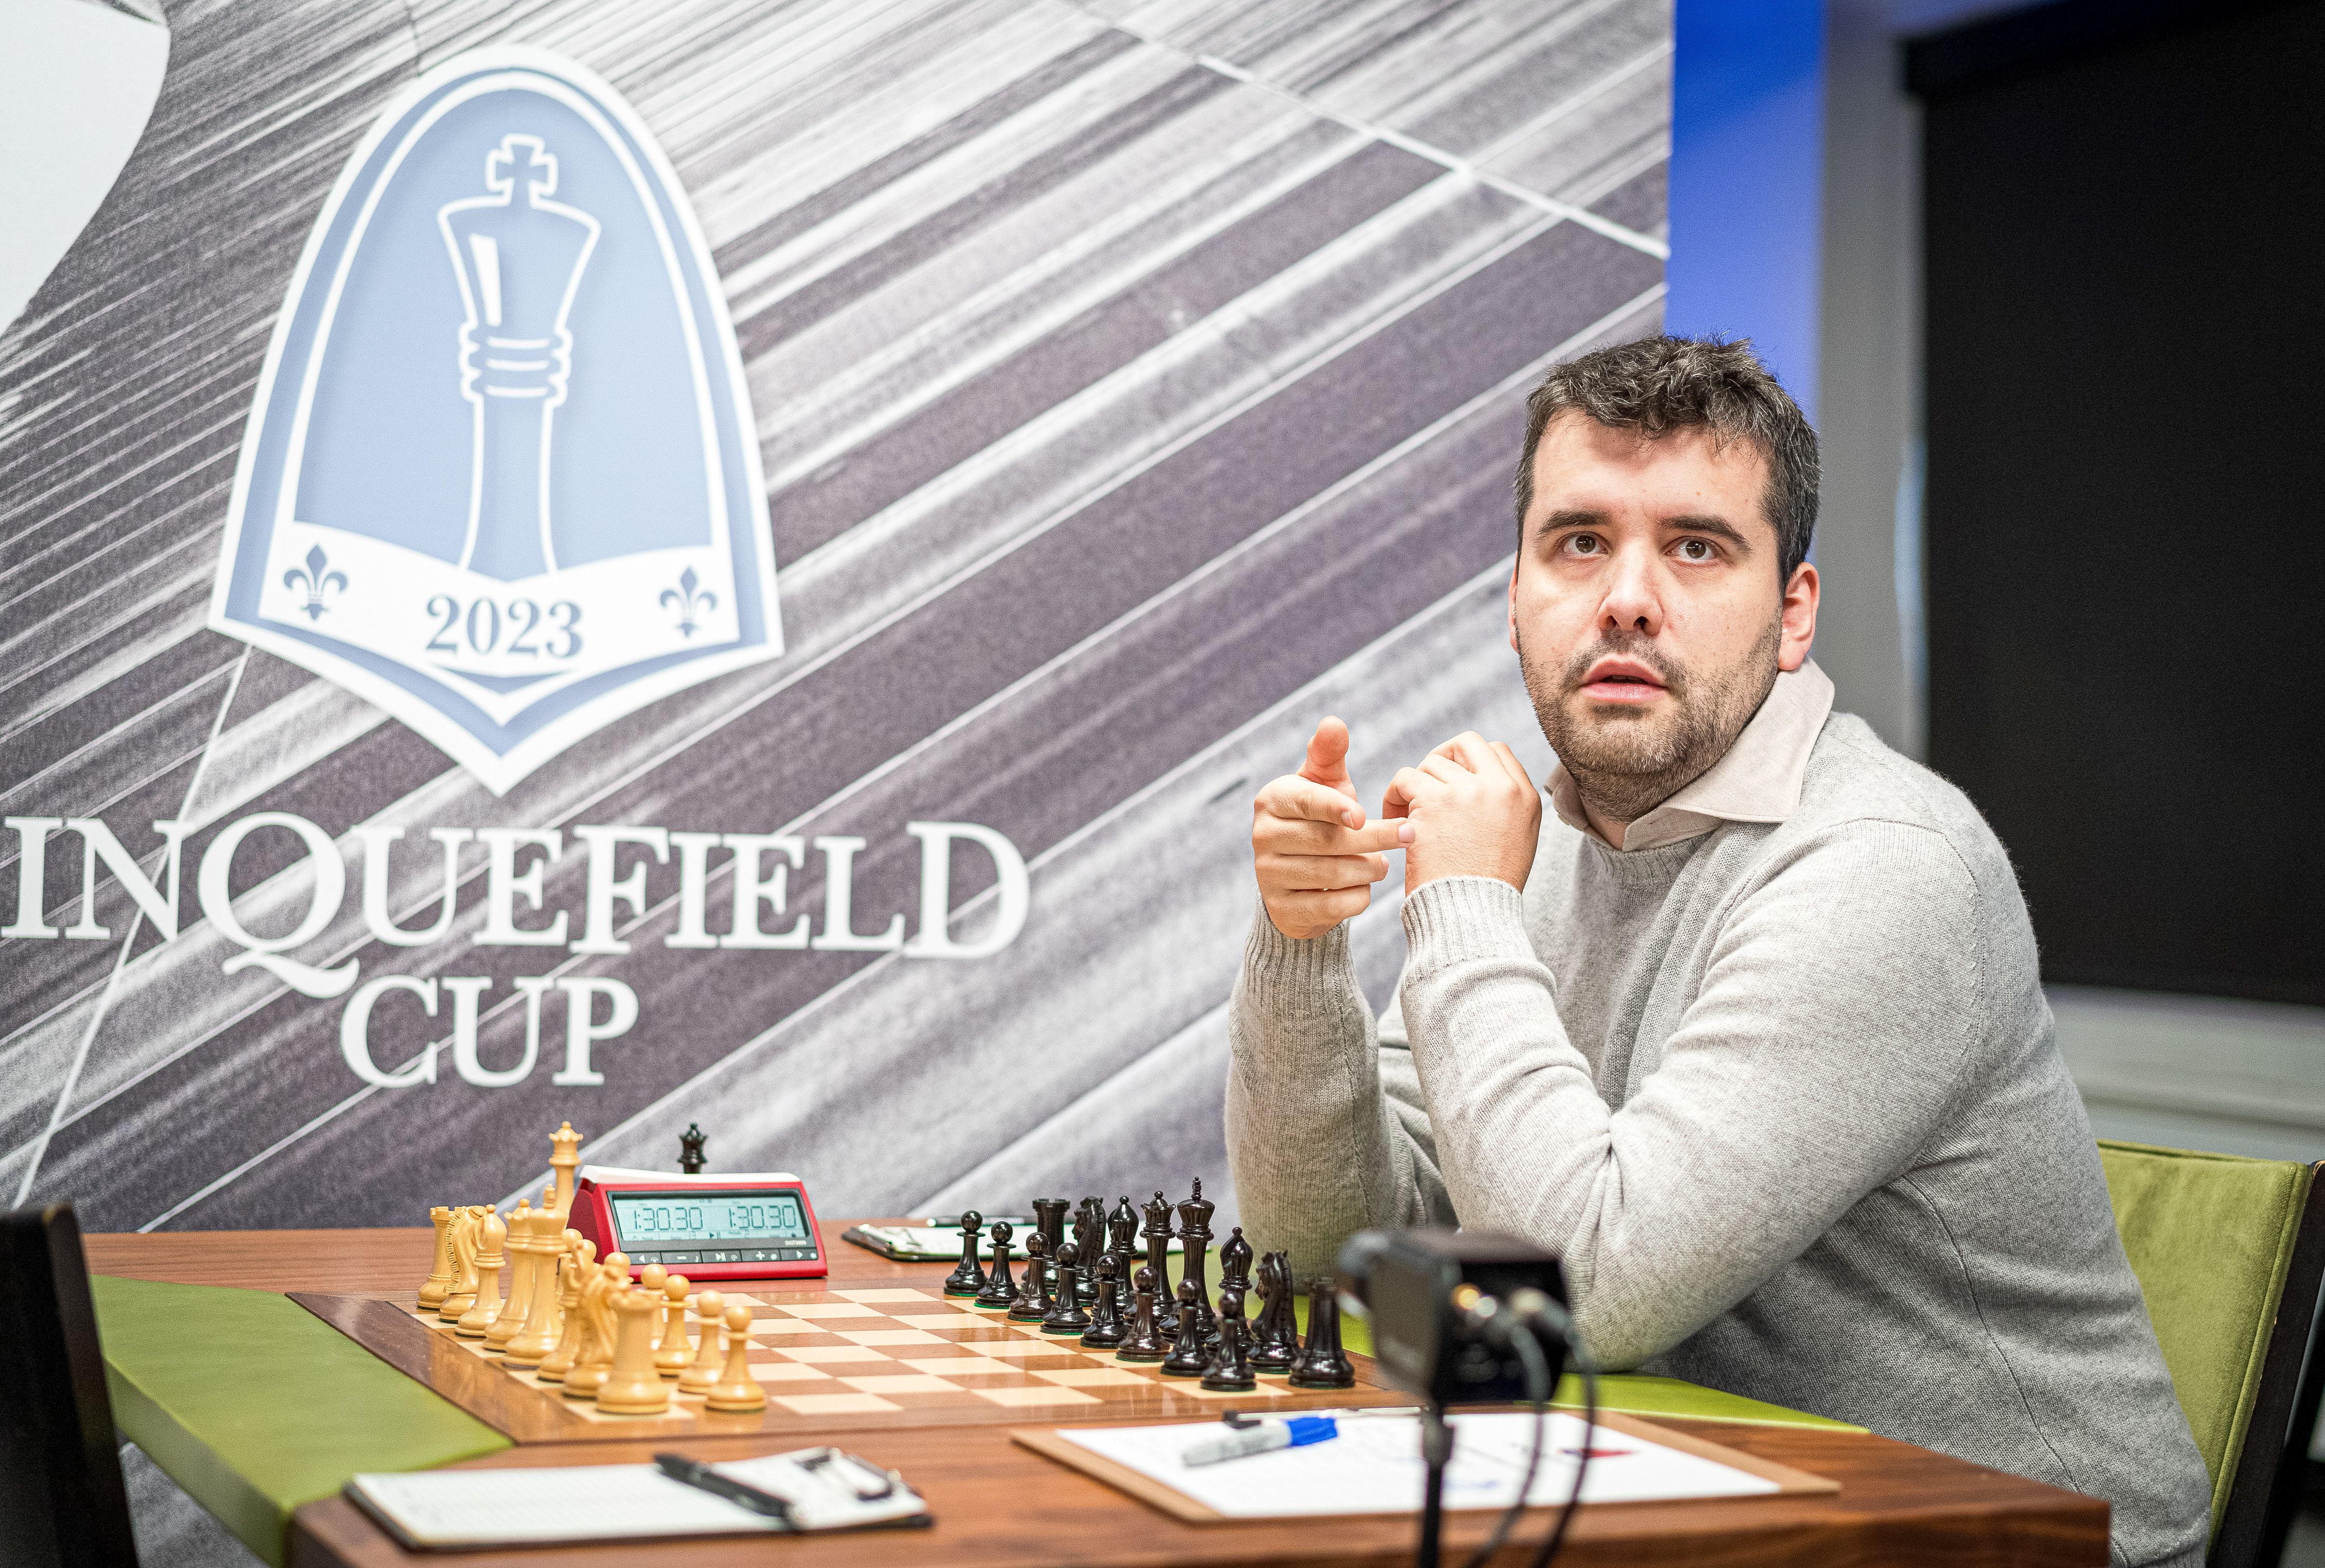 This moment when Richard Rapport learned his game vs Jan-Krzysztof Duda is  postponed. Picture by Lennart Ootes for #grandchesstour…